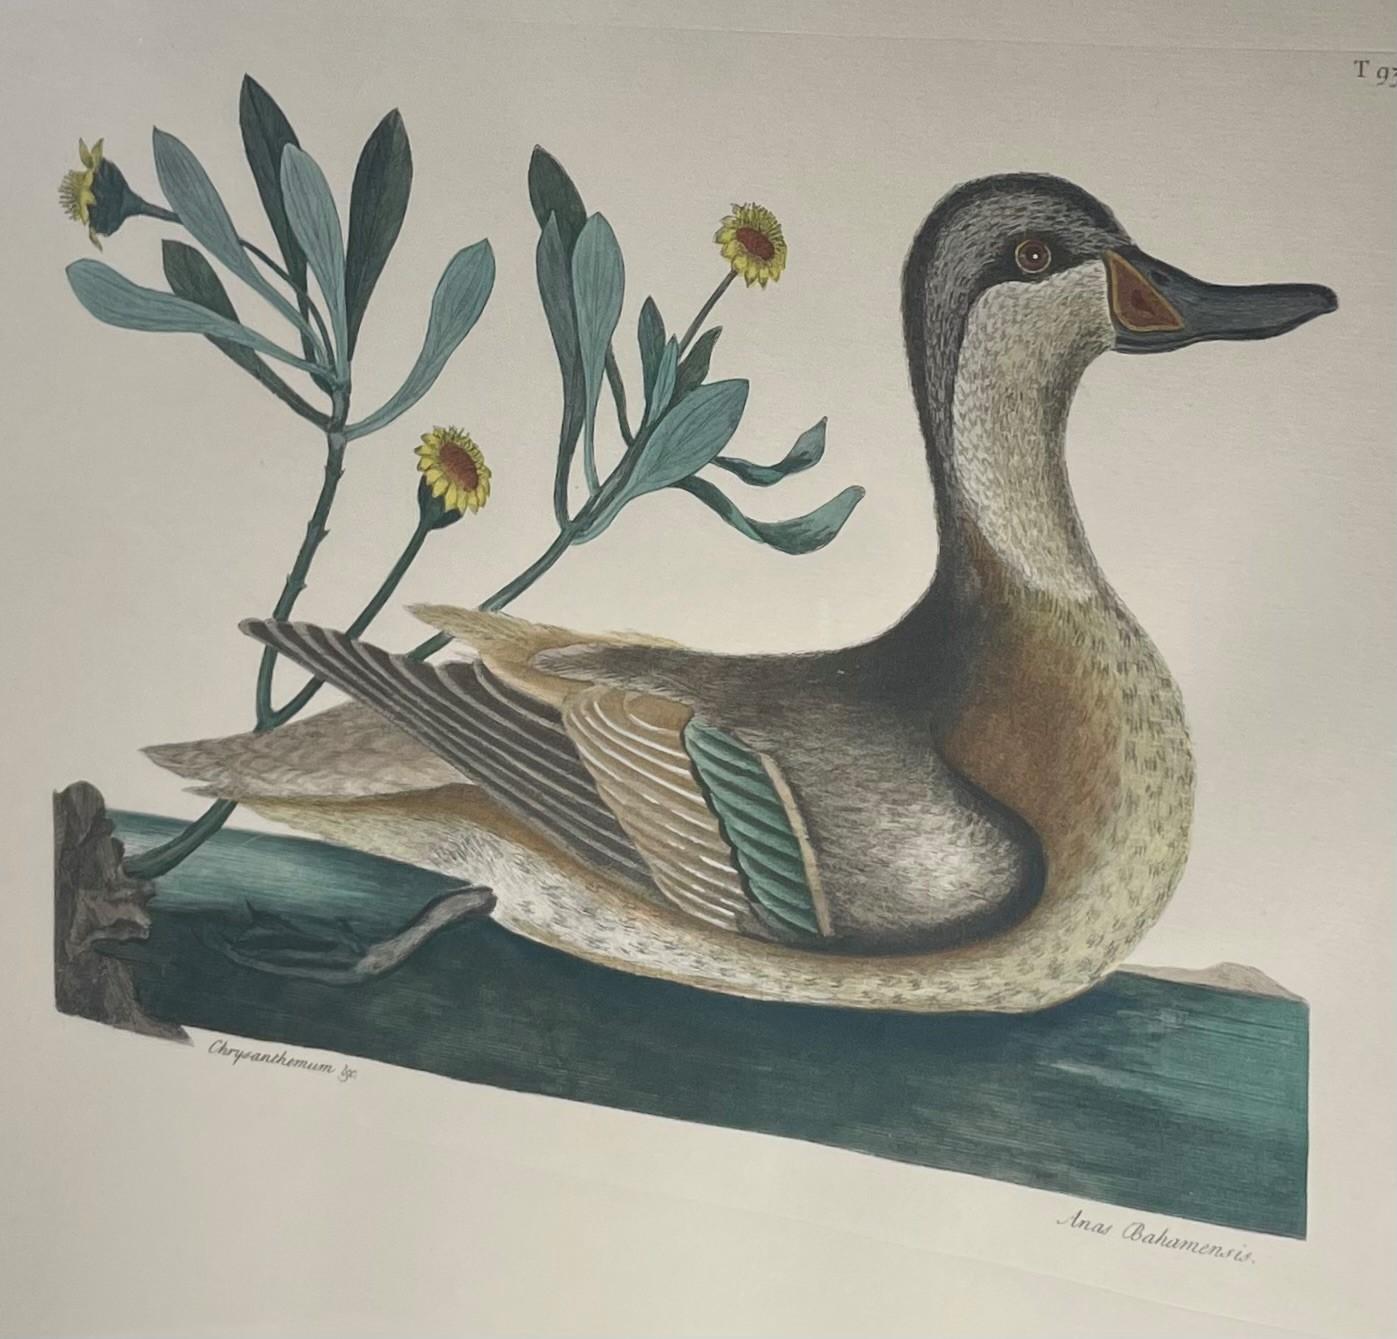 Other Etching Mark Catesby, Anas Bahamensis 'the Ilathera Duck' Chrysanthemum &C T93 For Sale